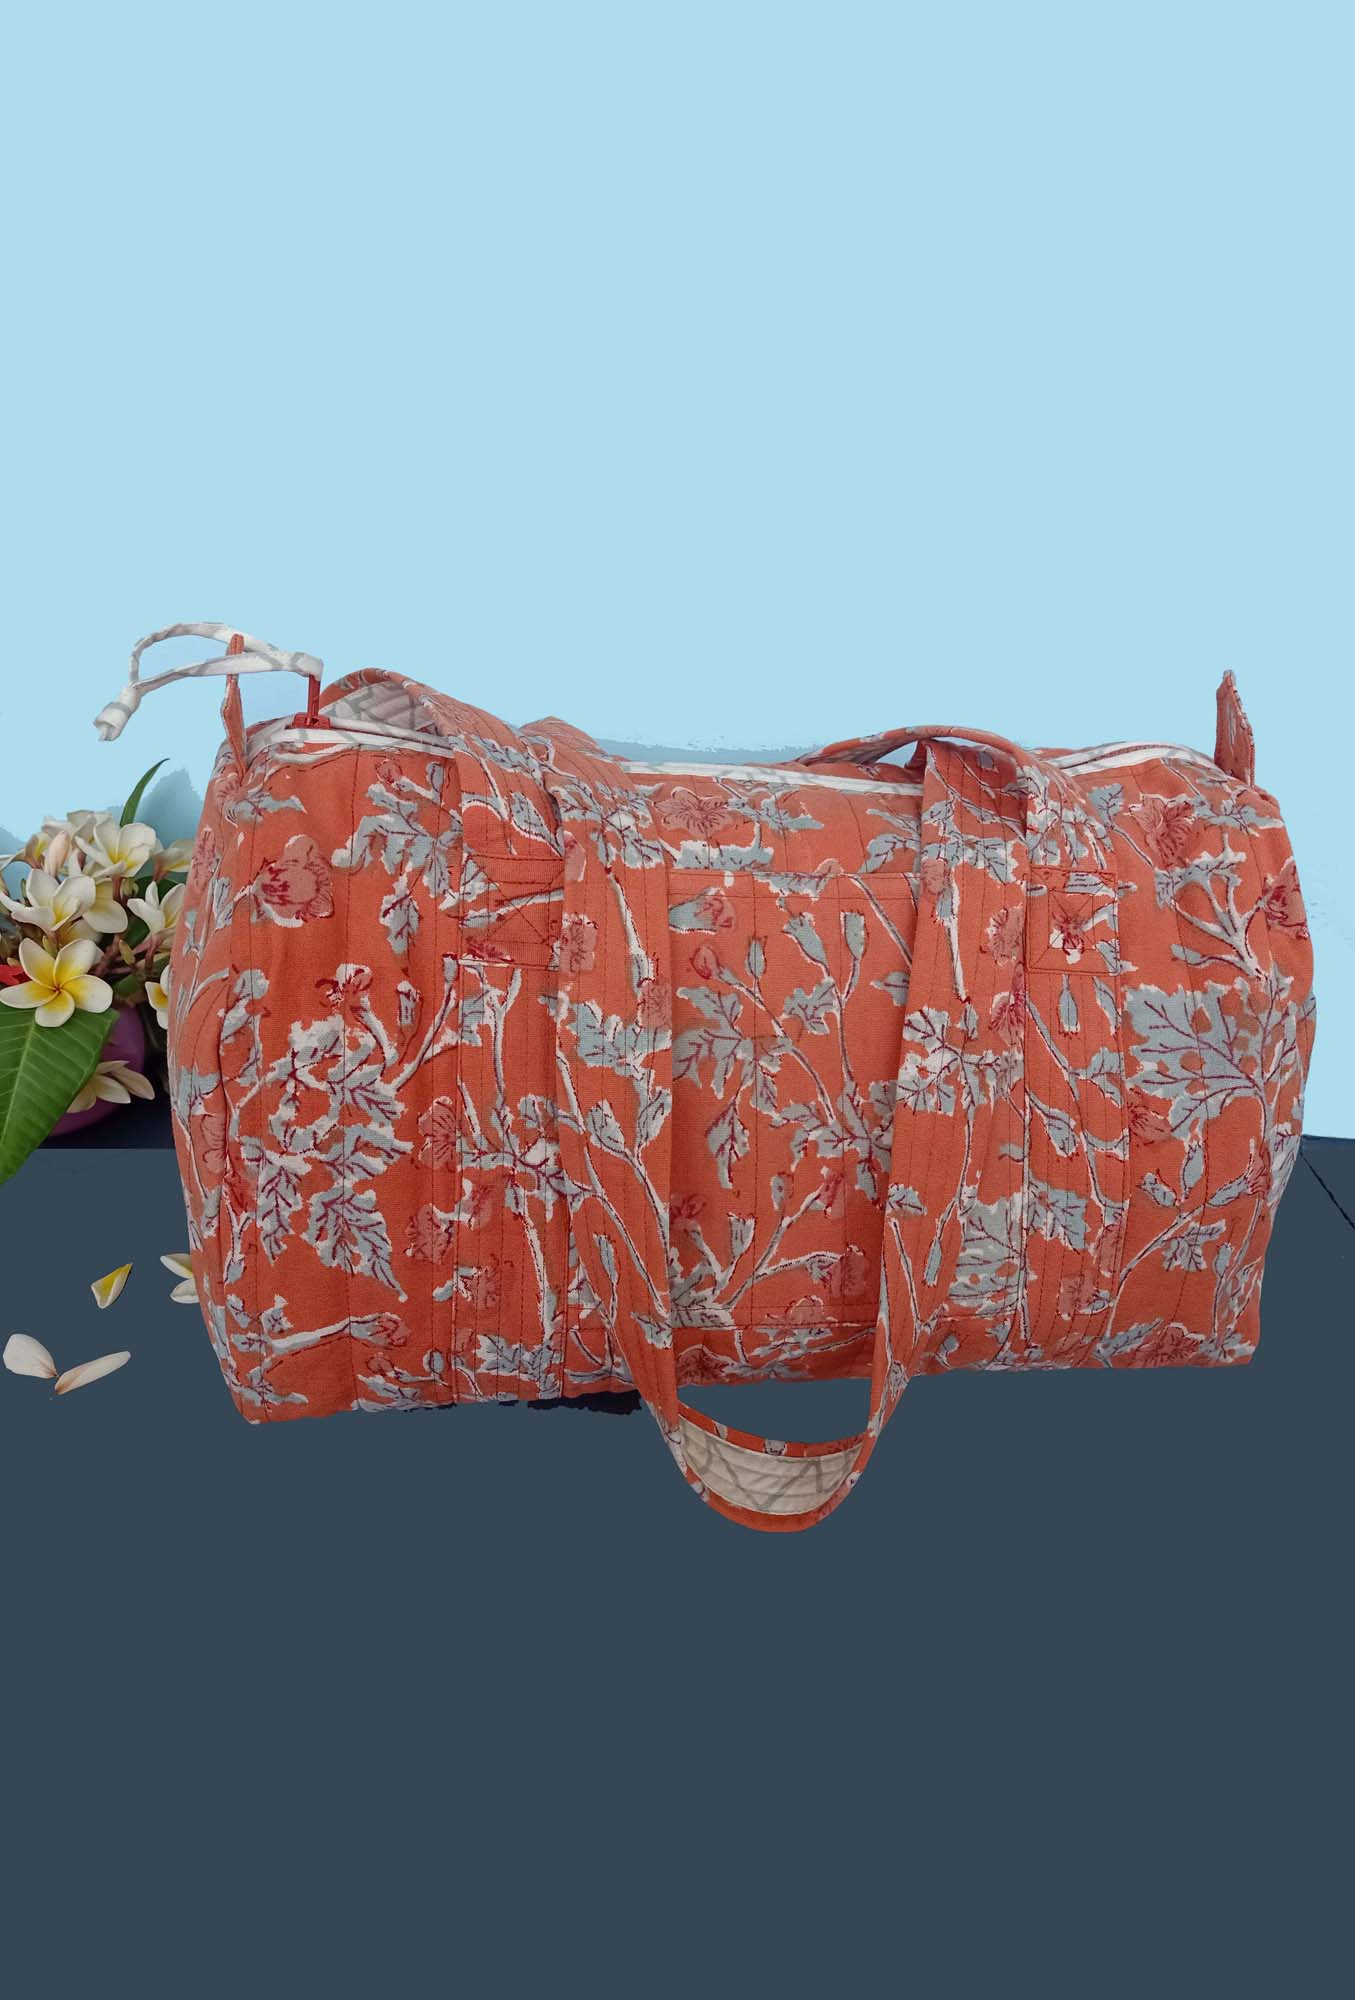 Buy 100% Cotton Printed Cabin Bags Online In India